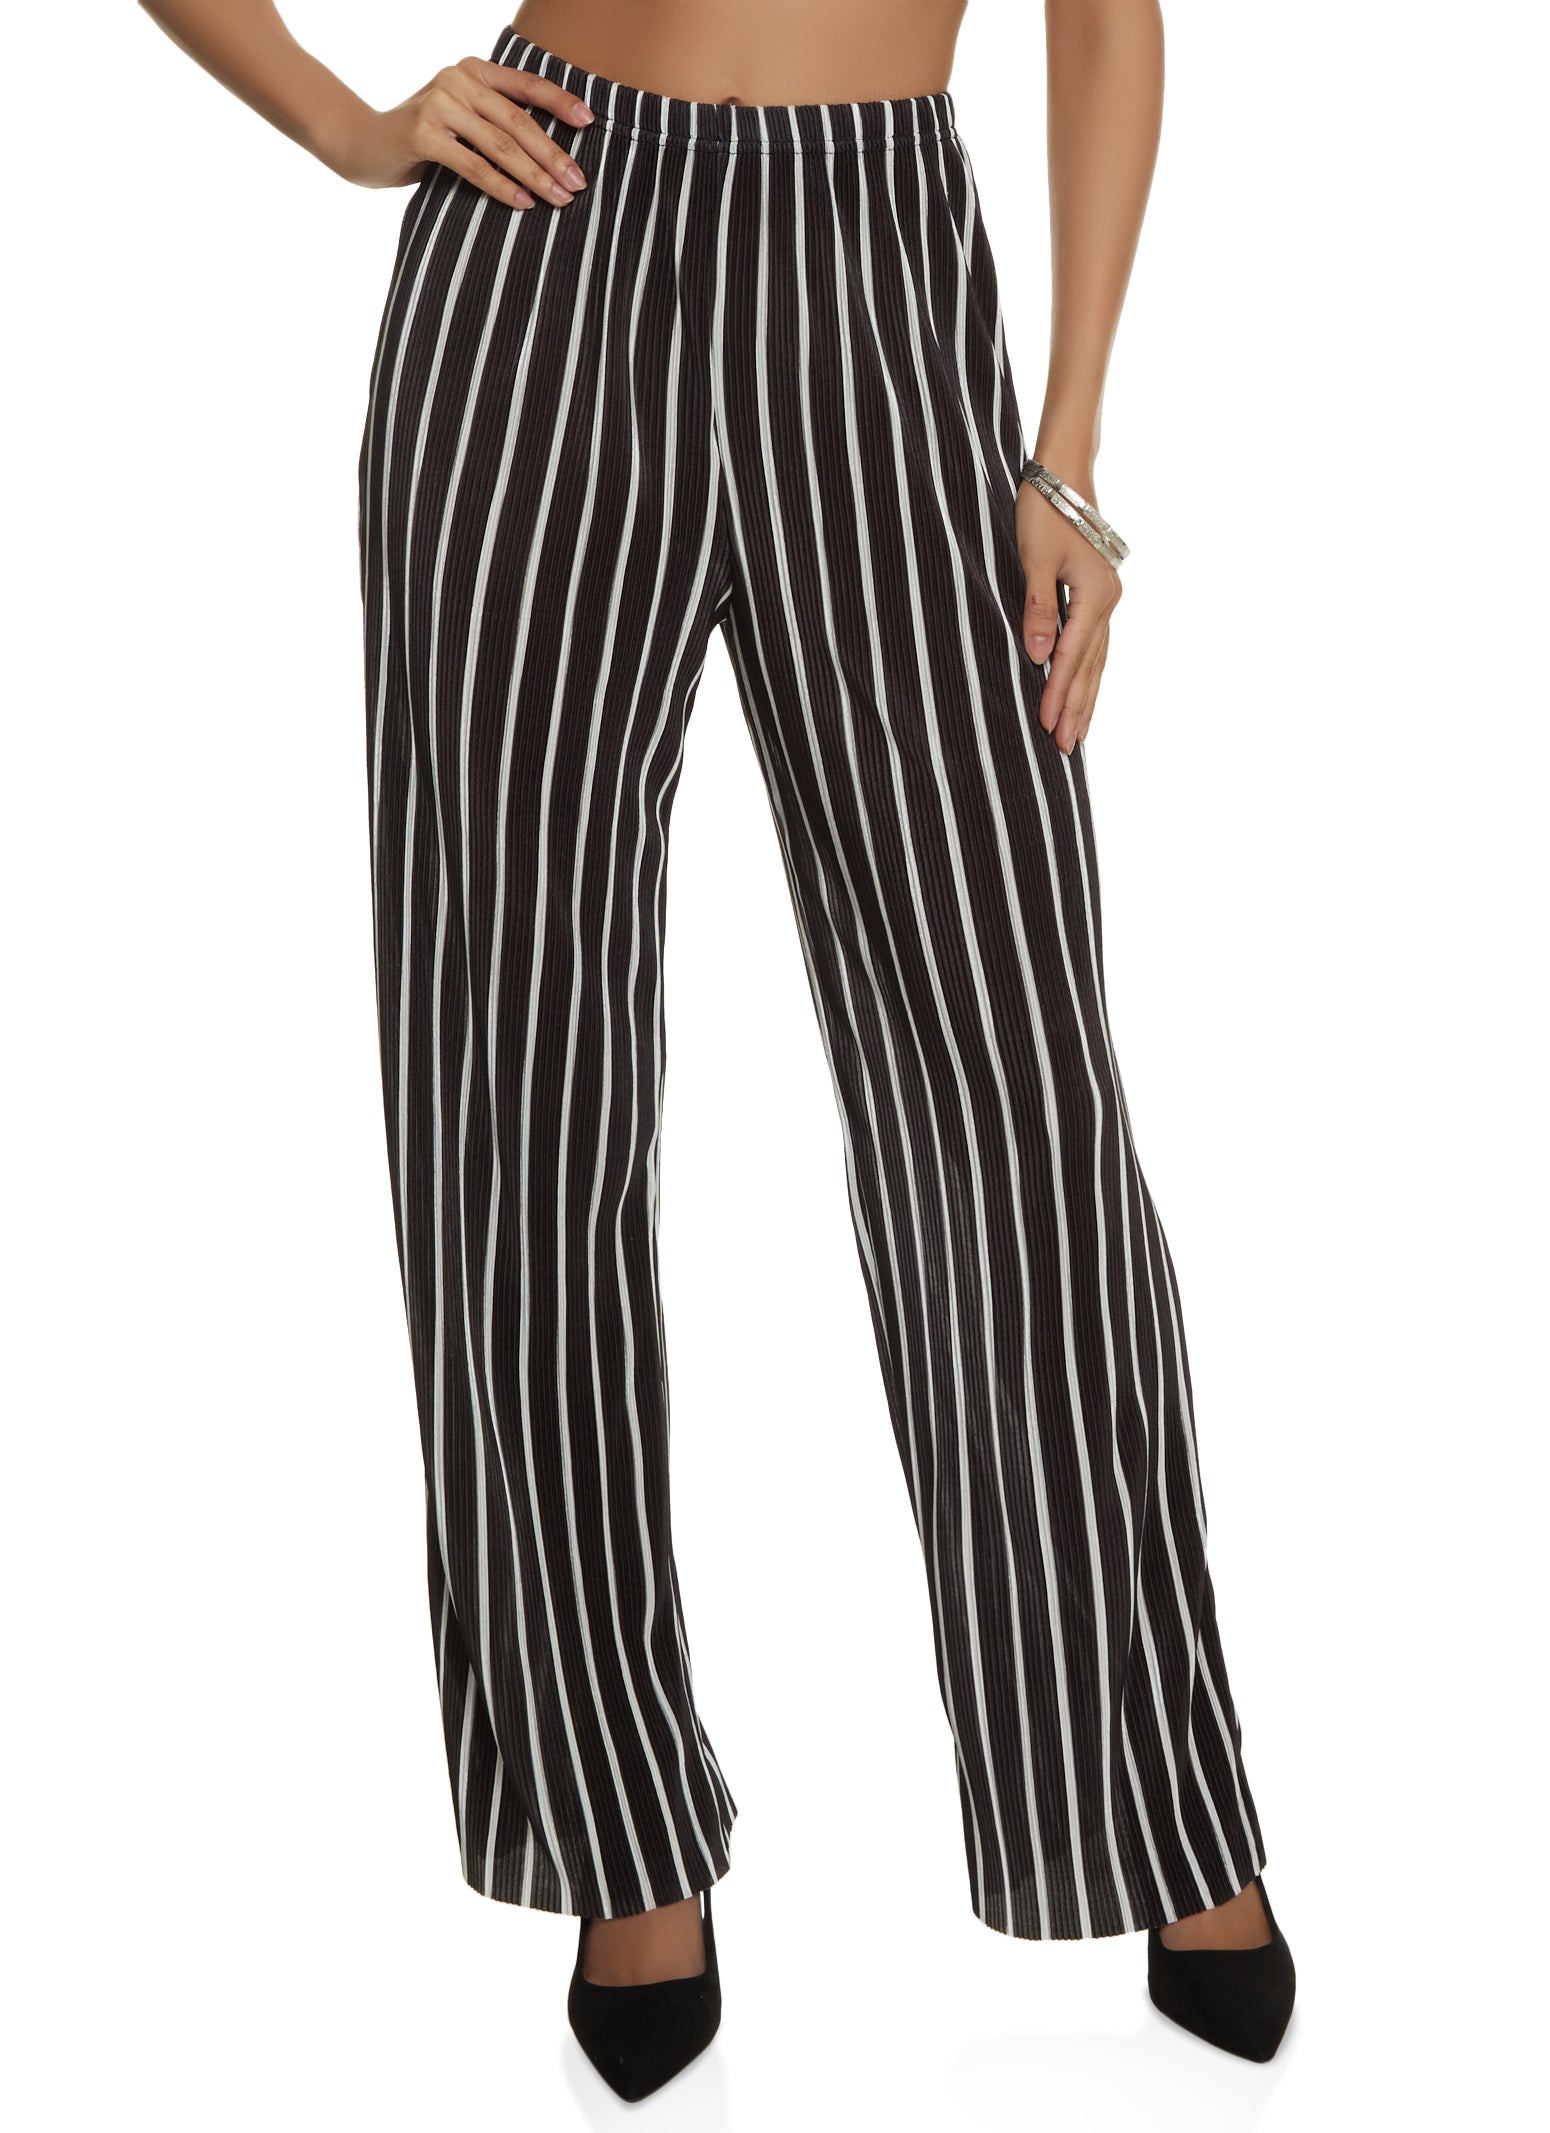 DRIES VAN NOTEN Black & Off-White Striped Trousers – Inventory Control